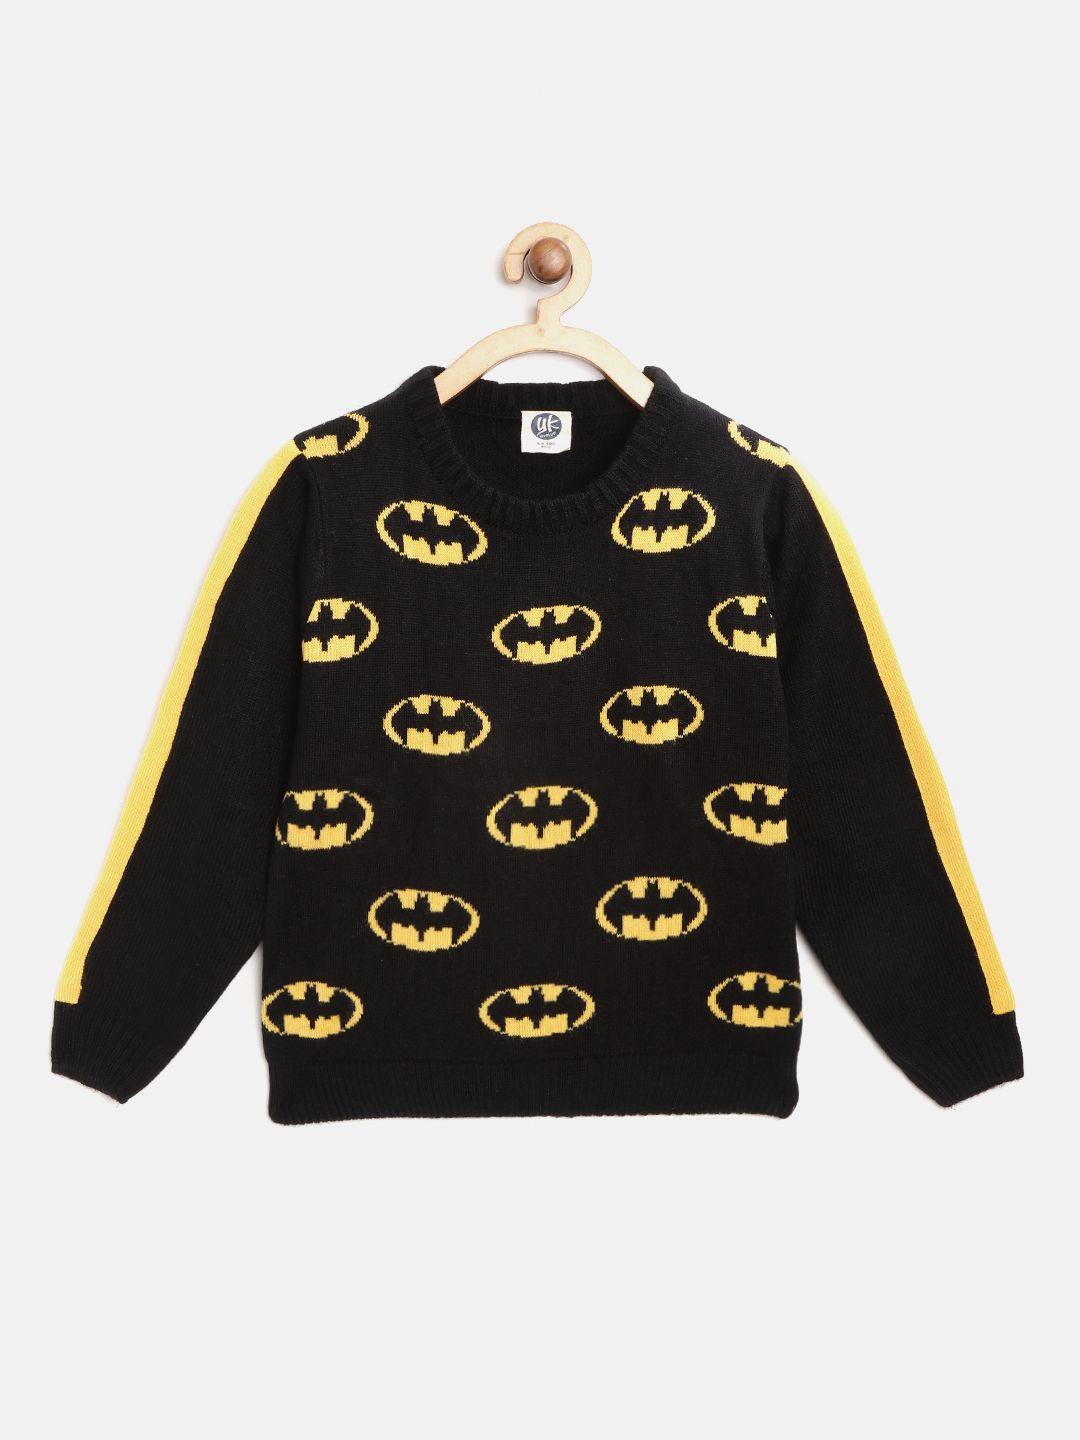 yk justice league boys black & yellow batman patterned pullover